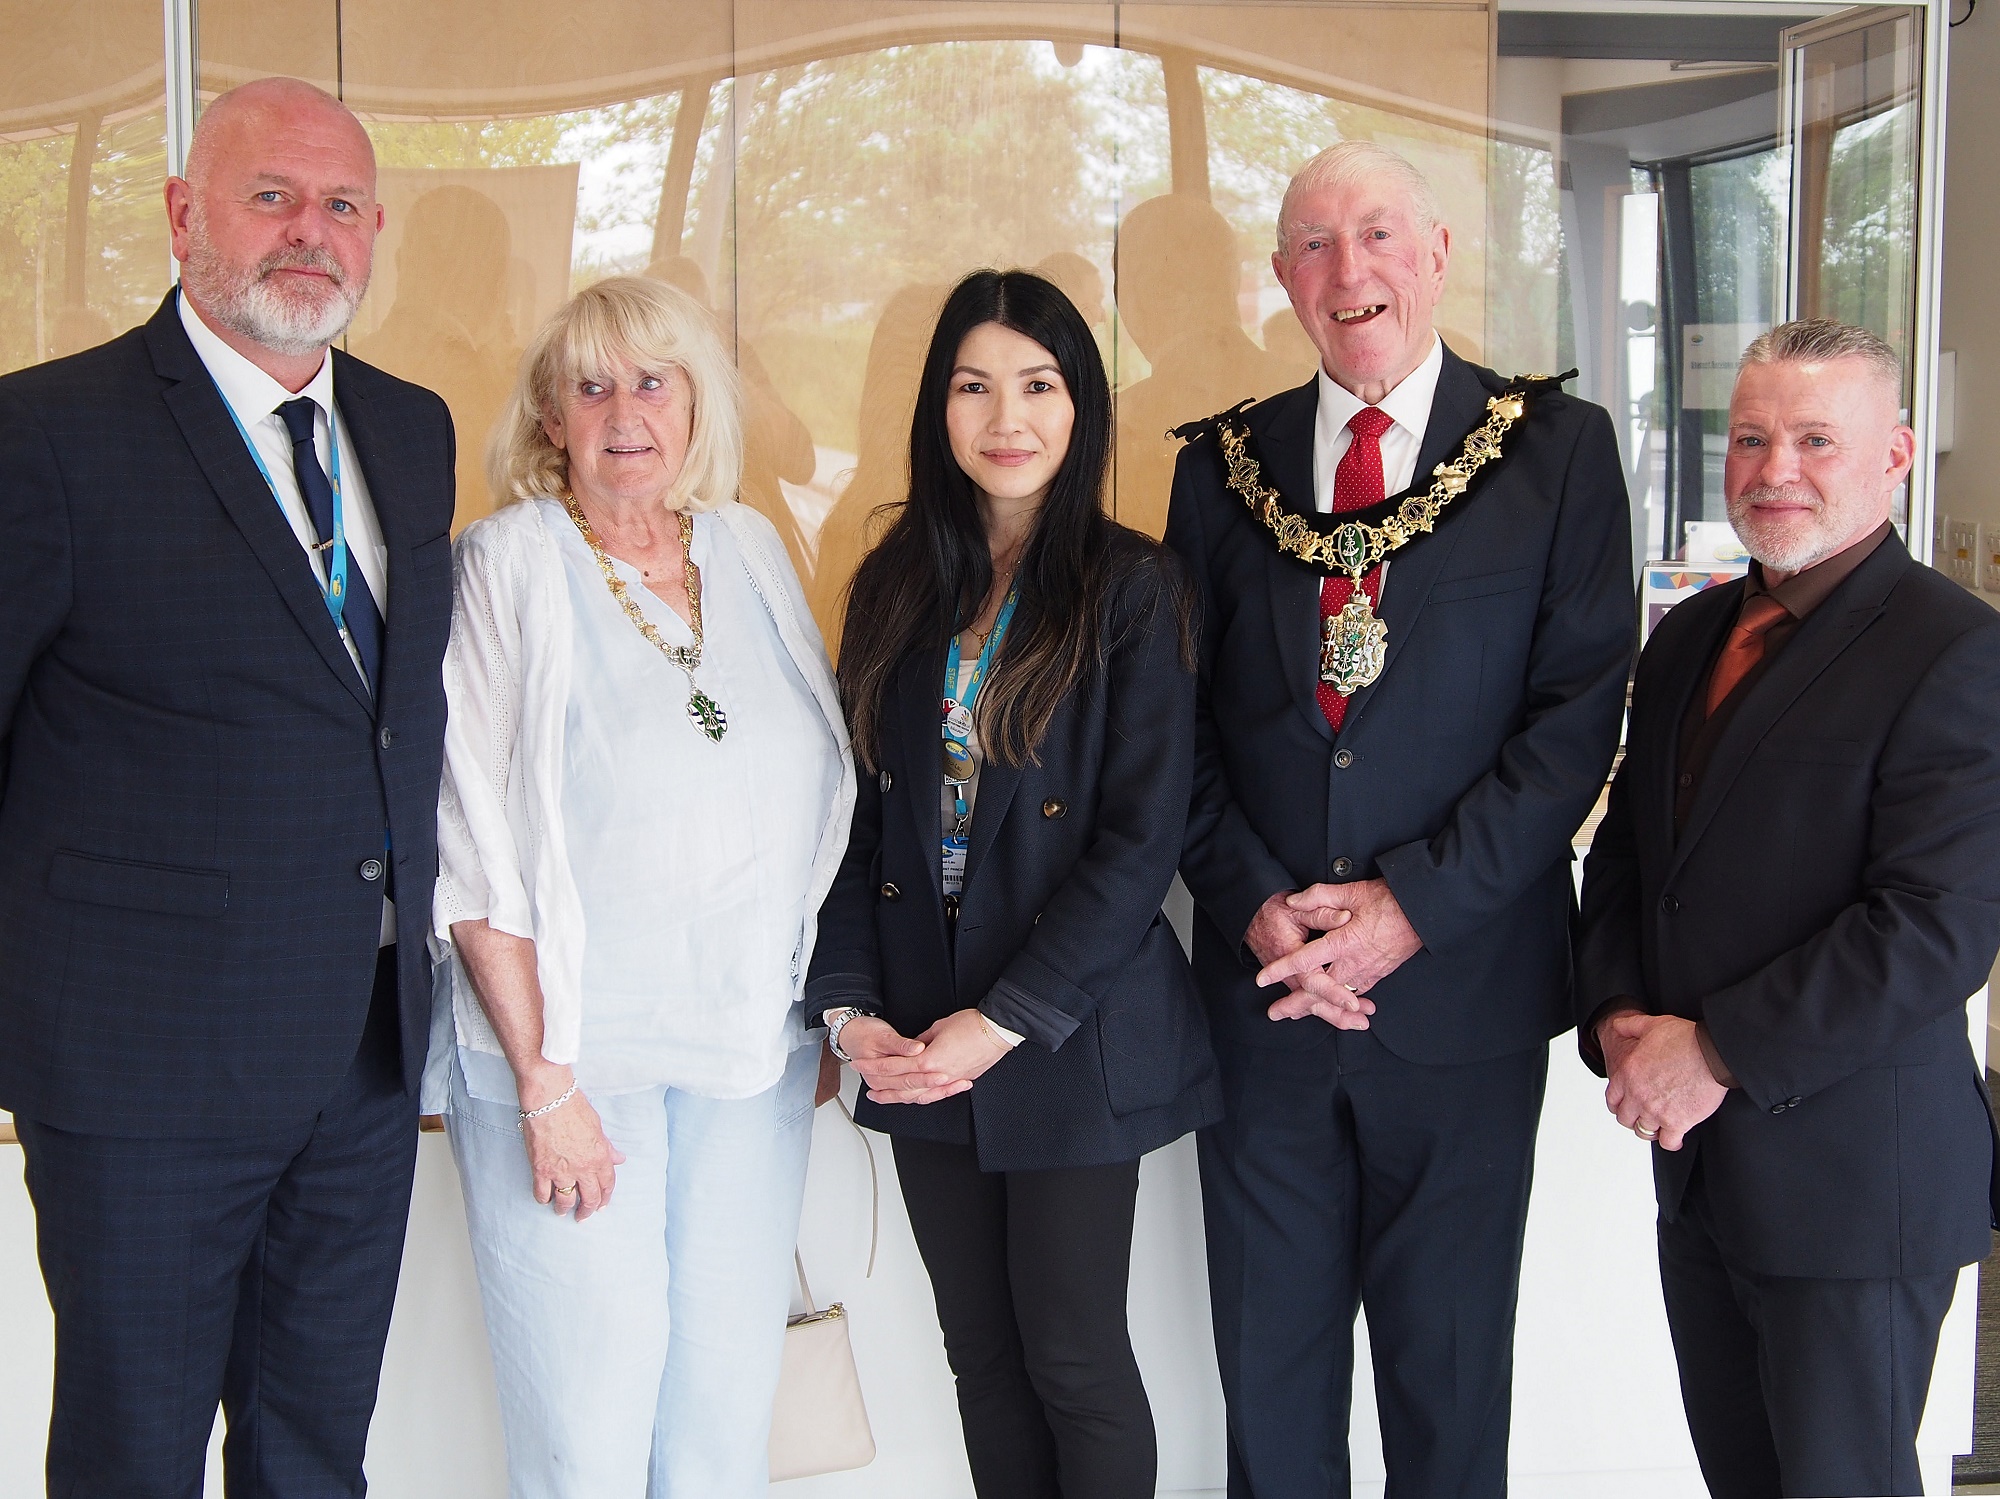 The Mayor and Mayoress of Wirral with Wirral Met representatives